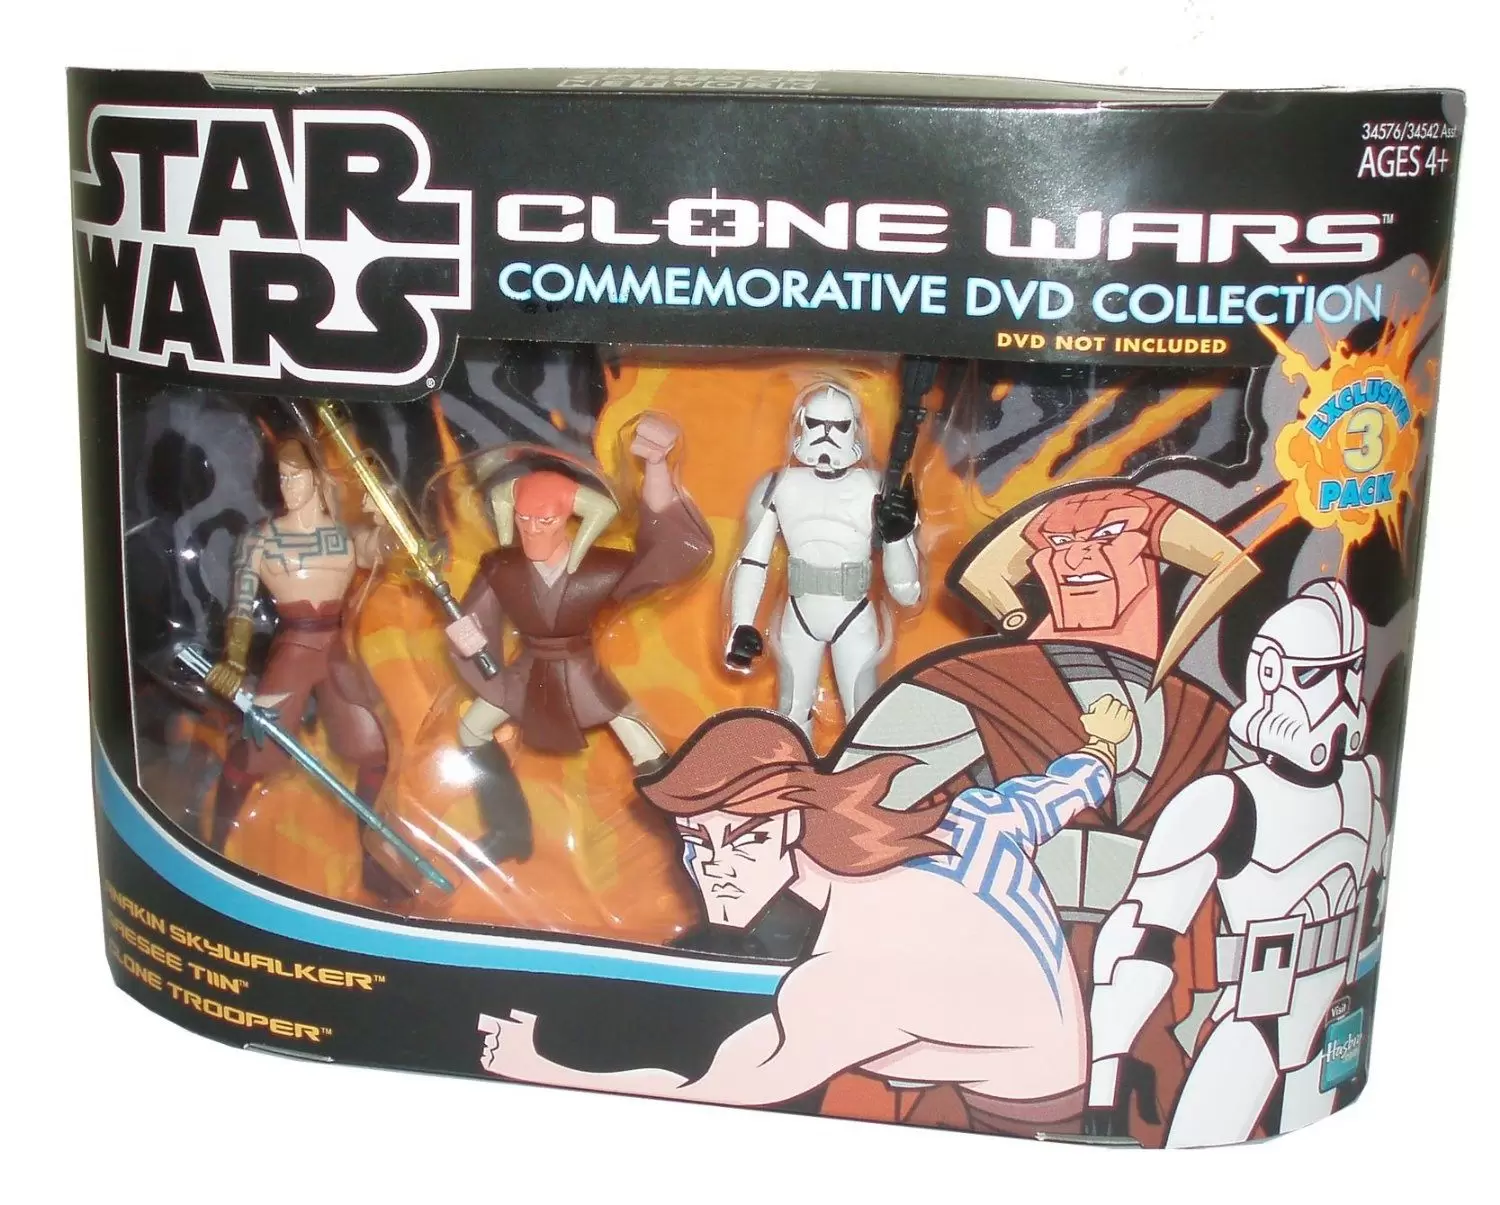 Commemorative DVD Collection STAR WARS: CLONE WARS Volume 2 Pack 1 